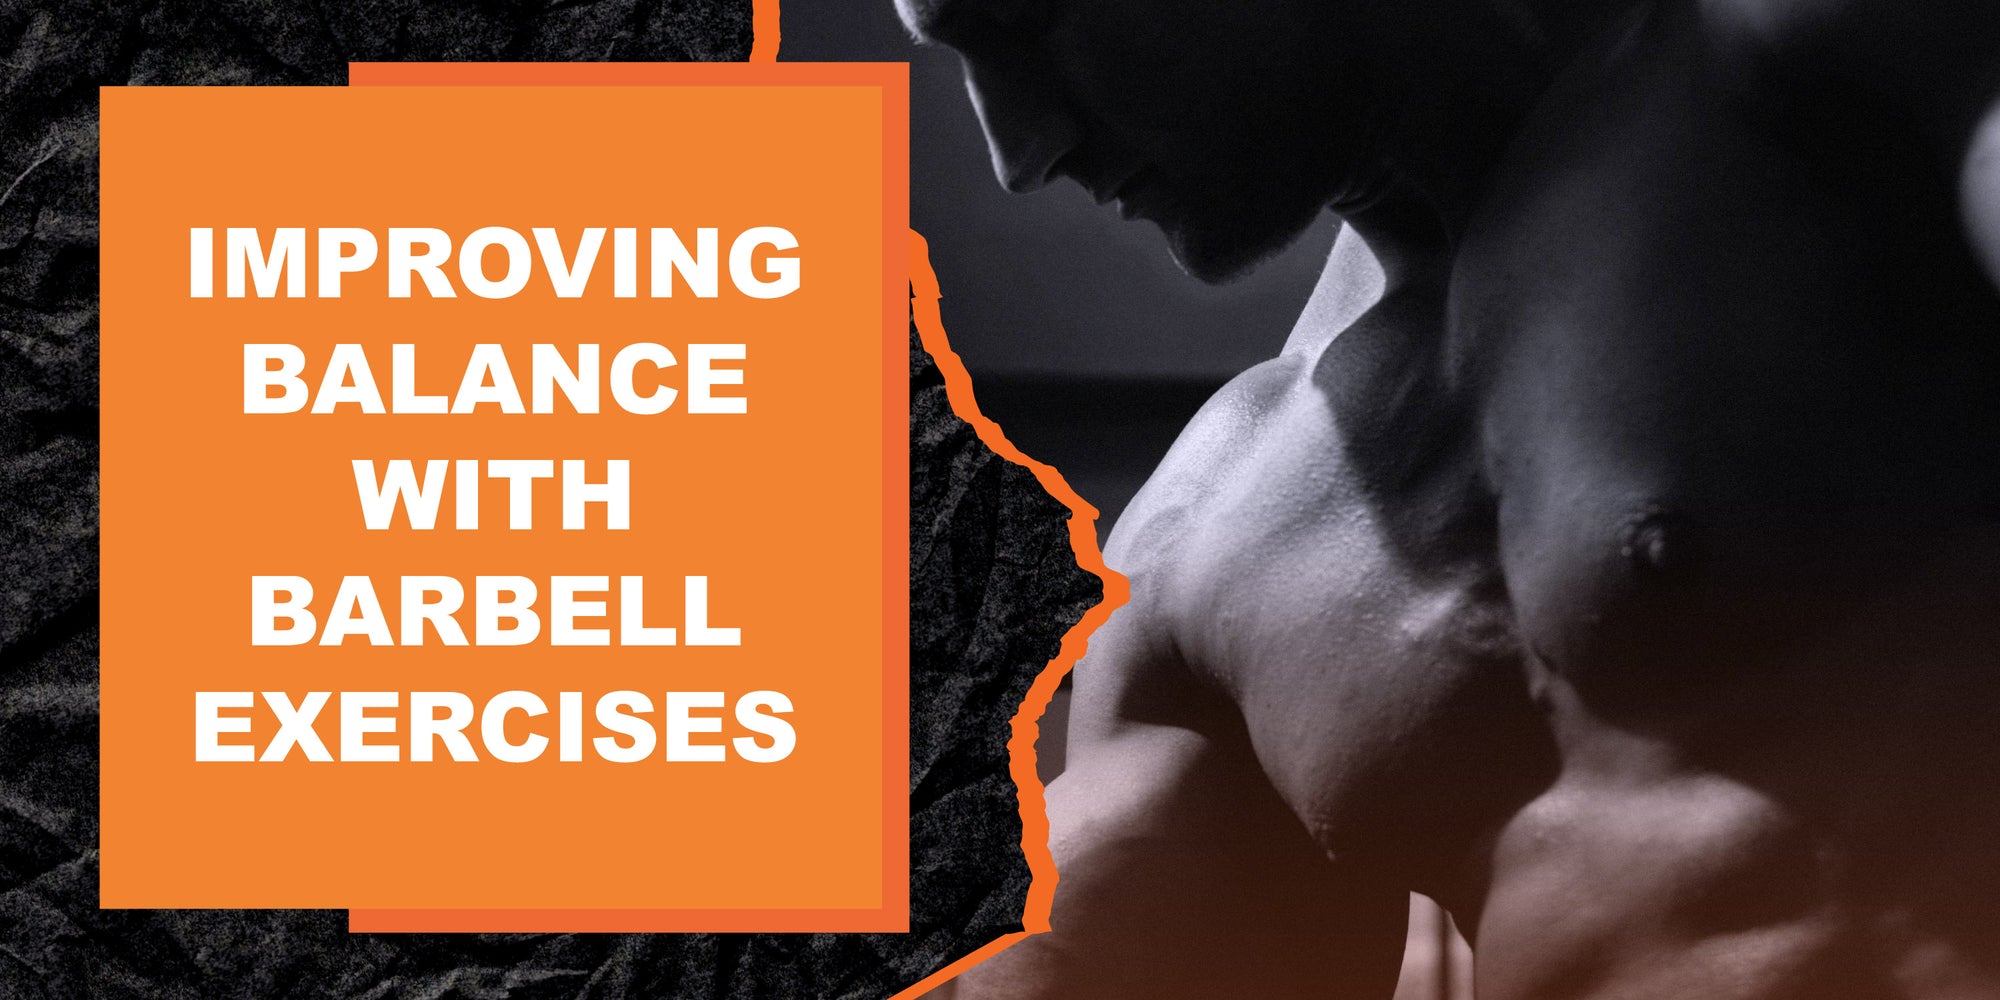 Improving Balance With Barbell Exercises